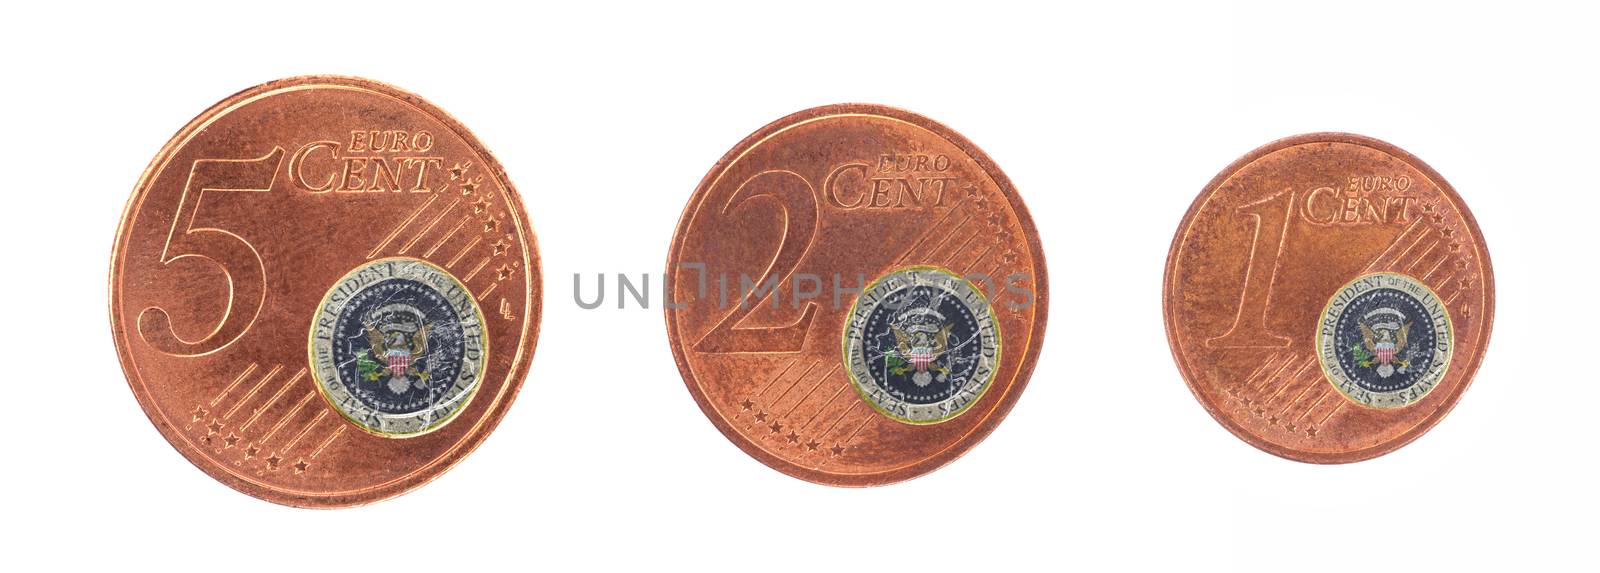 European union concept - 1, 2 and 5 eurocent, presidential seal (USA)